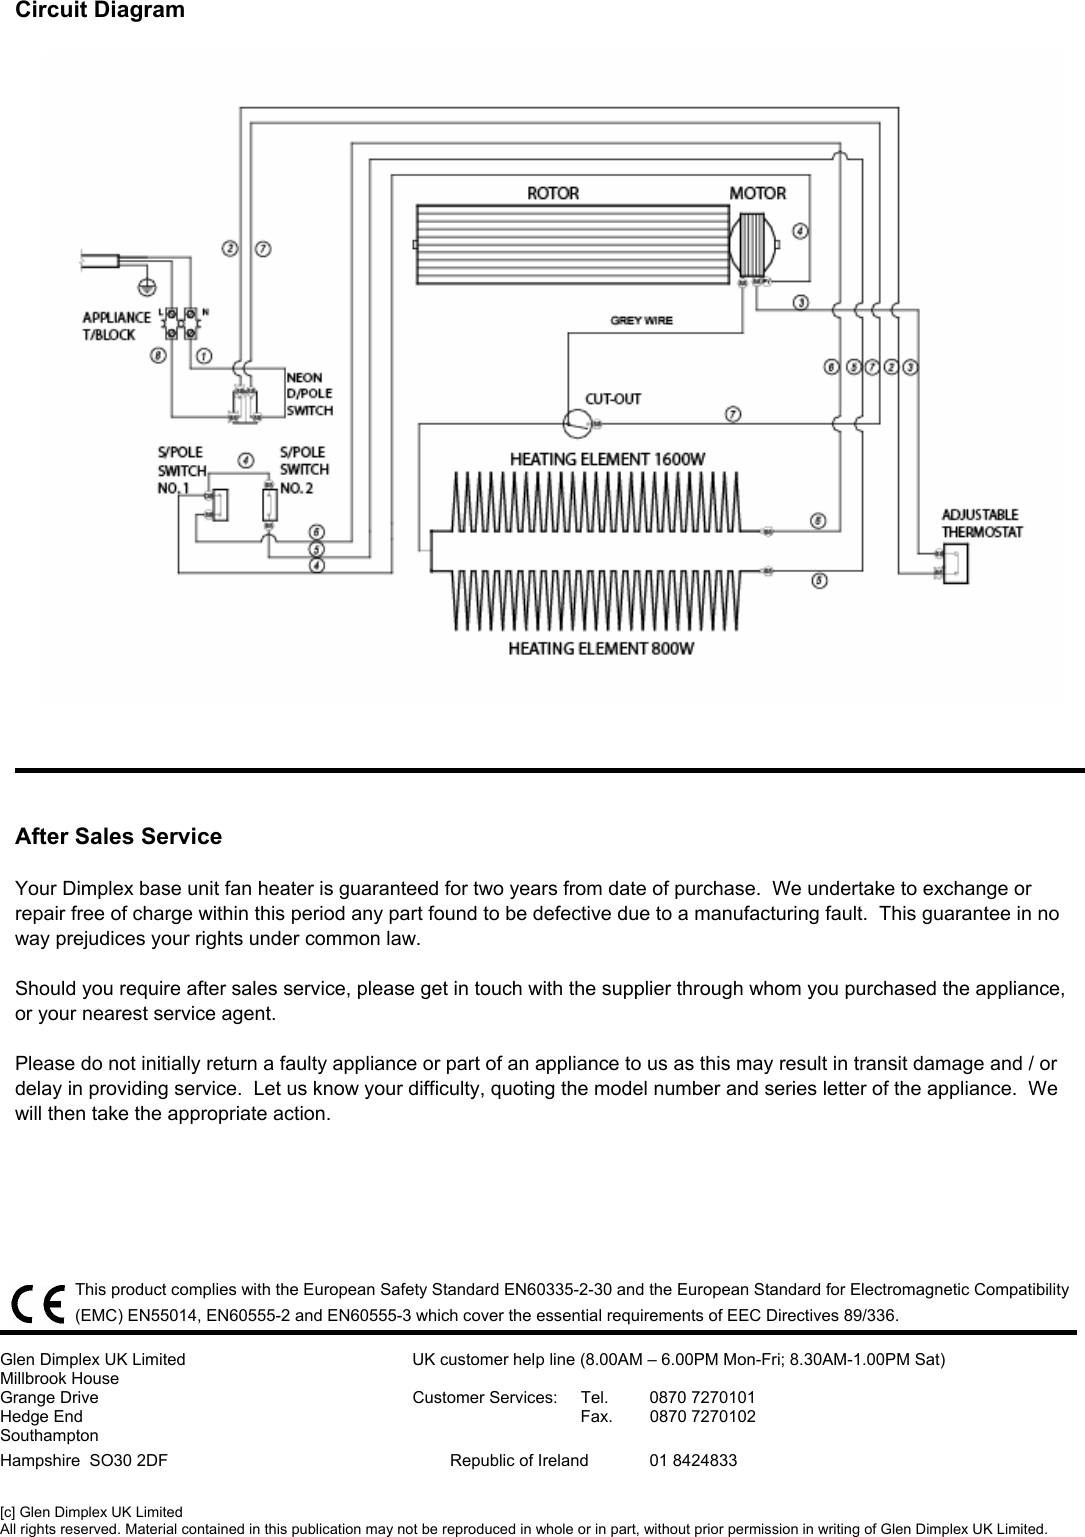 Page 4 of 4 - Dimplex Dimplex-Bfh24T-Users-Manual BFH24T Base Unit Heater - Issue 7